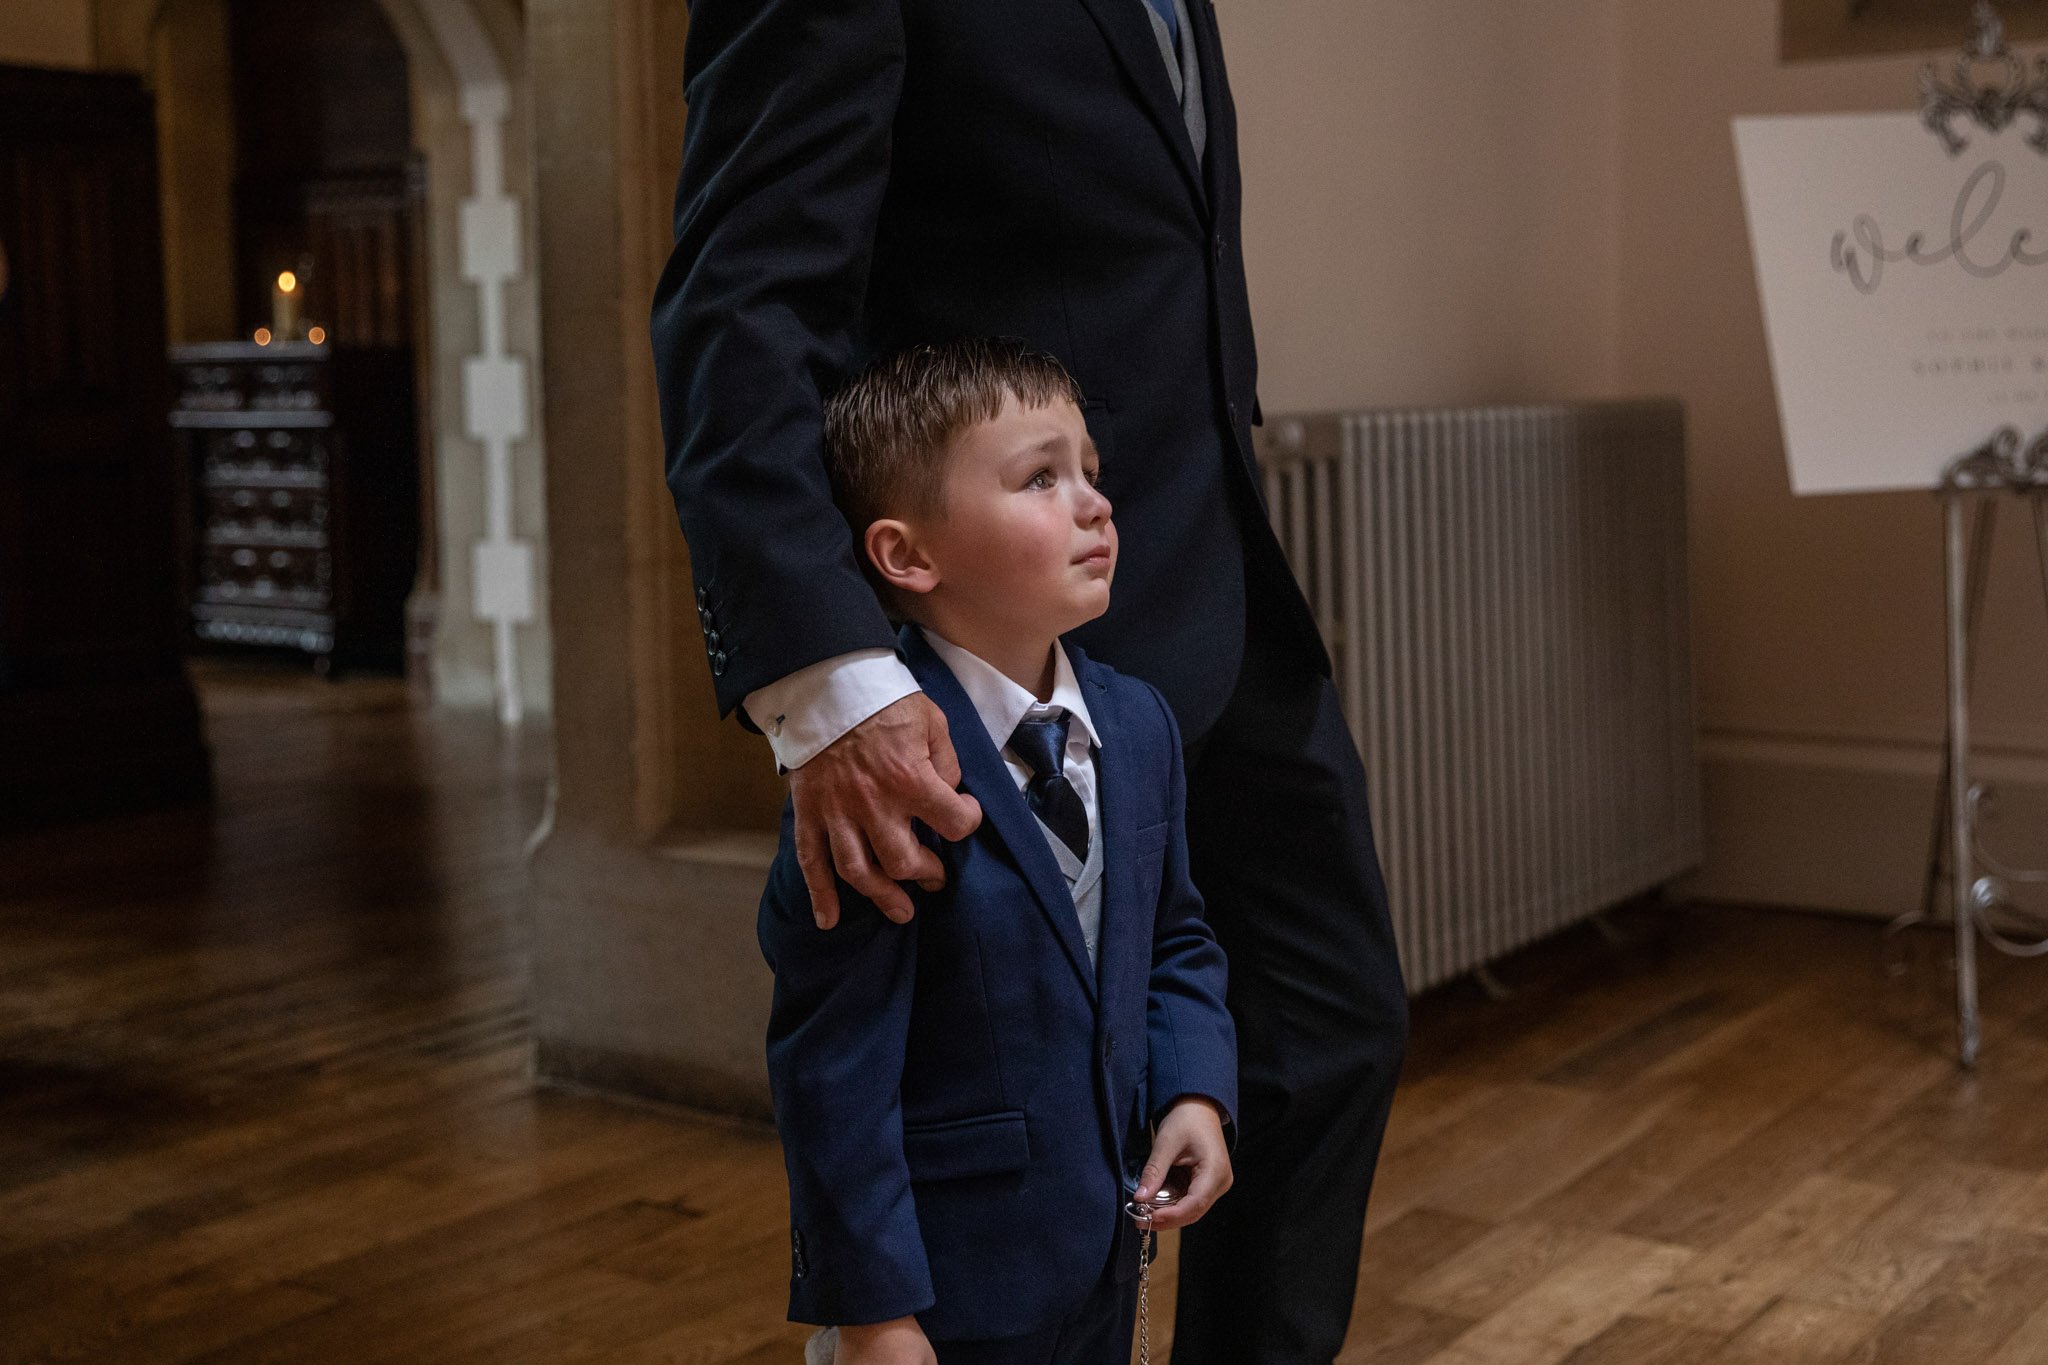 Young boy stood with man at a wedding